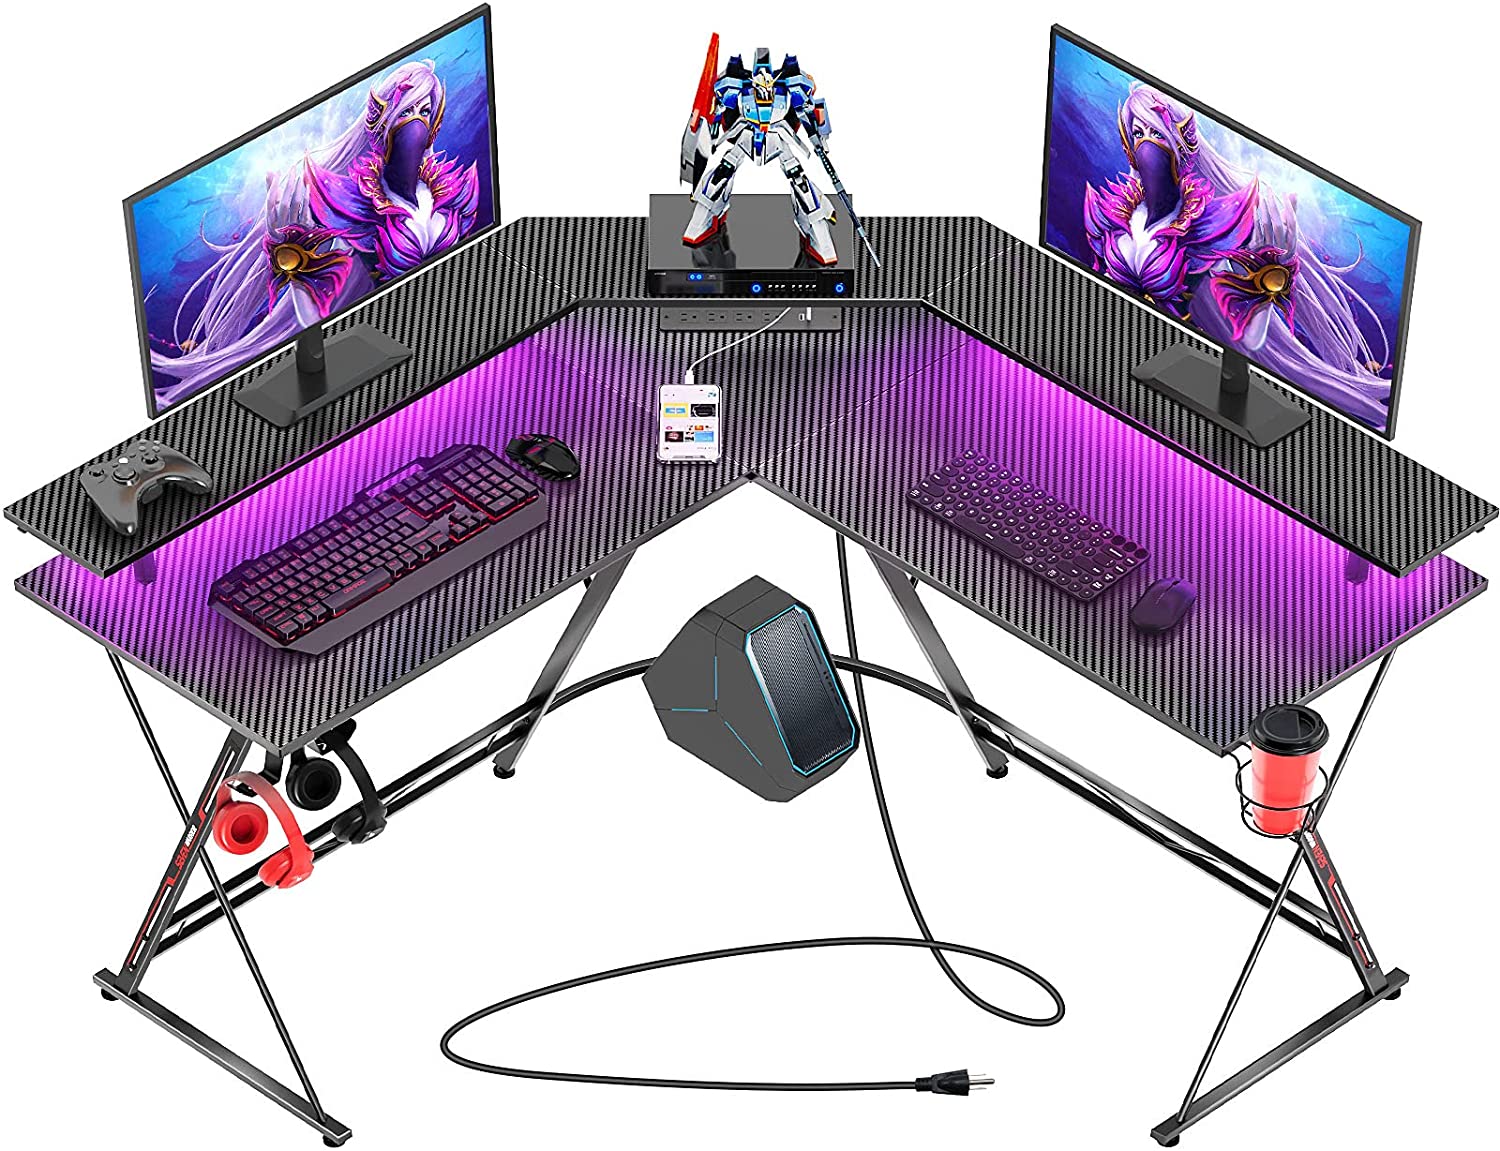 6. SEVEN WARRIOR Gaming Desk with LED Strip & Power Outlets